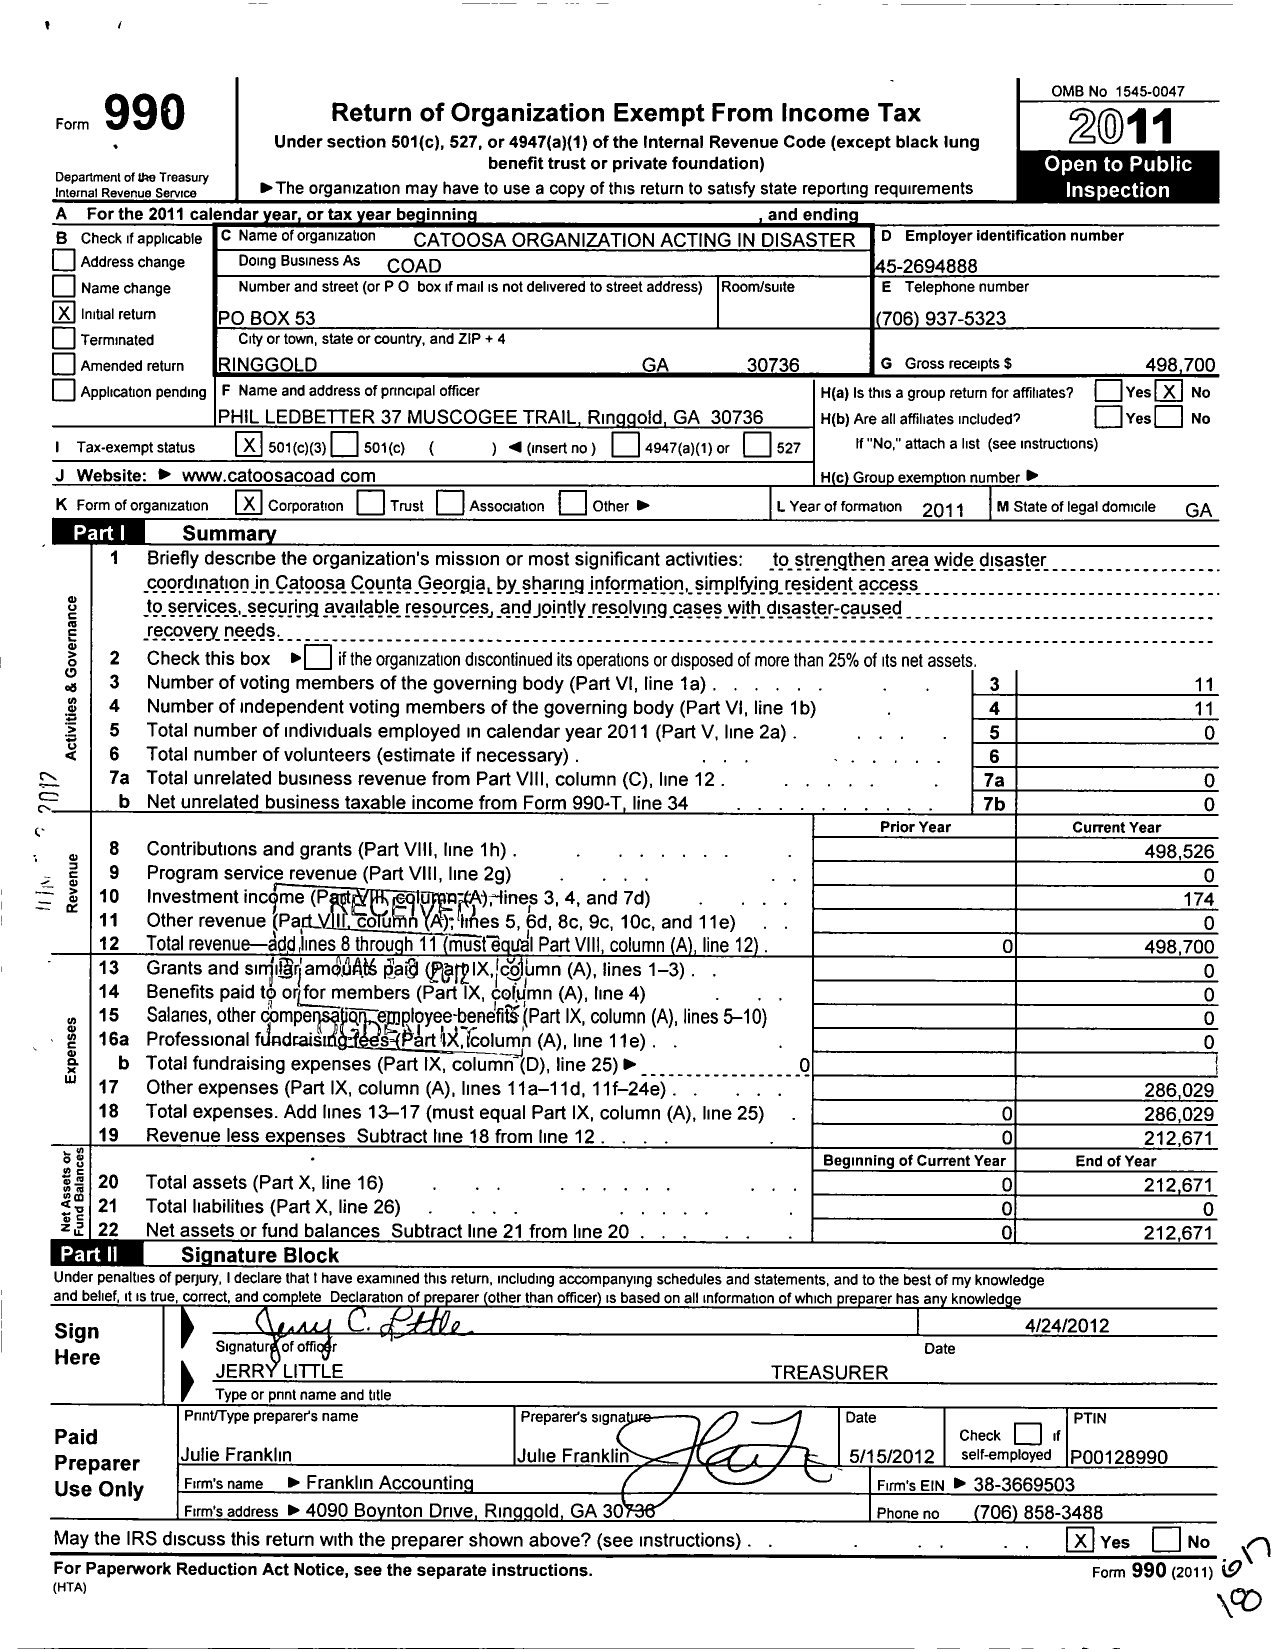 Image of first page of 2011 Form 990 for Catoosa Organization Acting in Disaster (COAD)